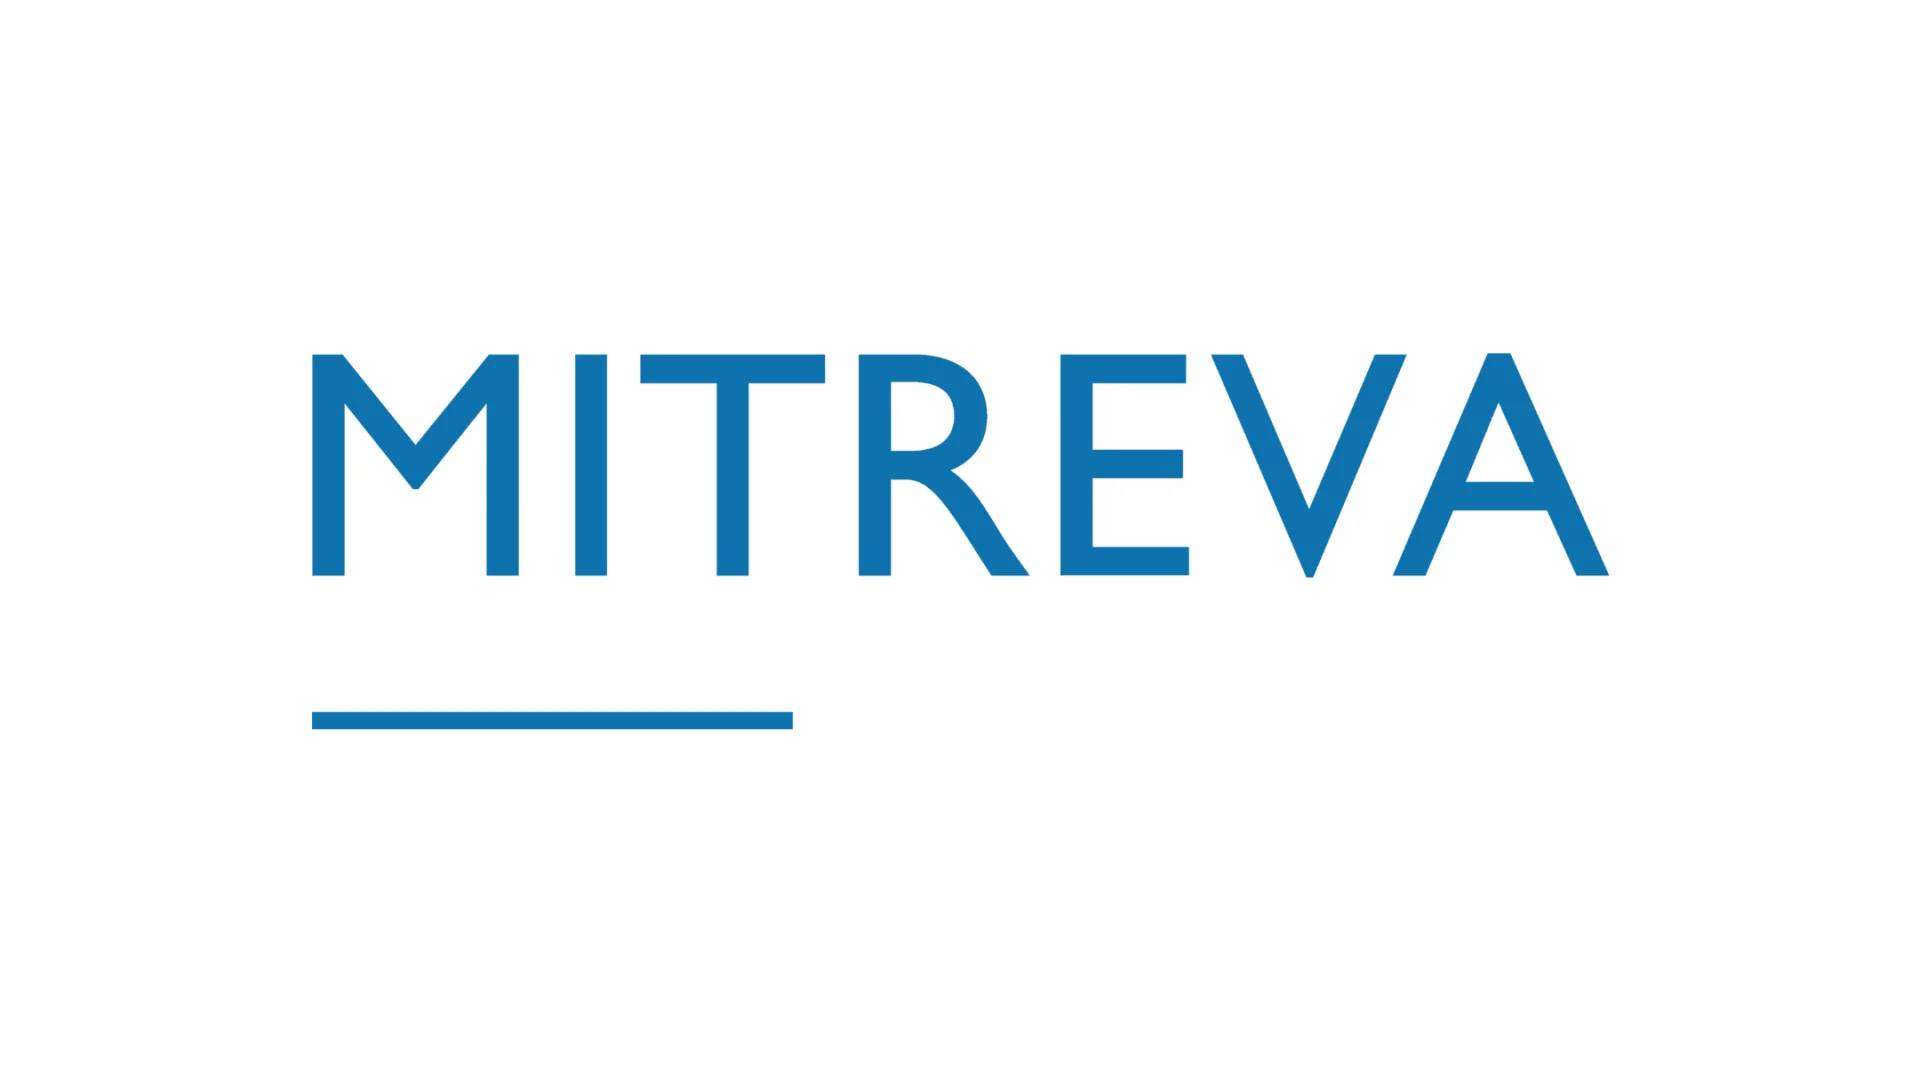 Logo of the Mitreva company. Blue letters on a white background